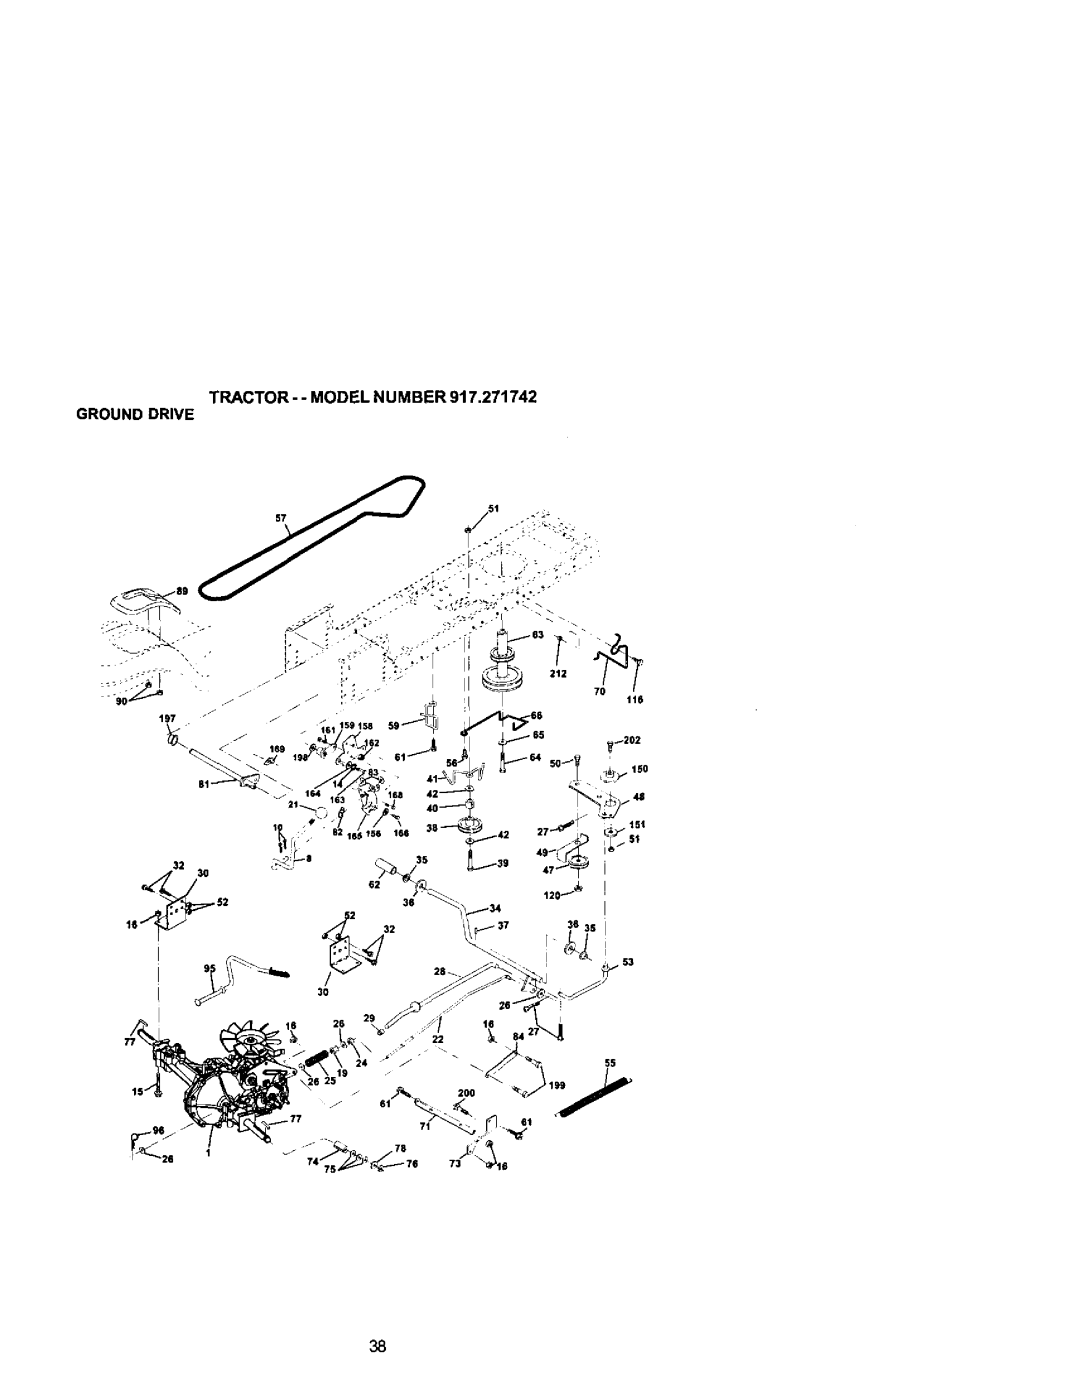 Craftsman 917.271742 owner manual Tractor- - Model Number Ground Drive 